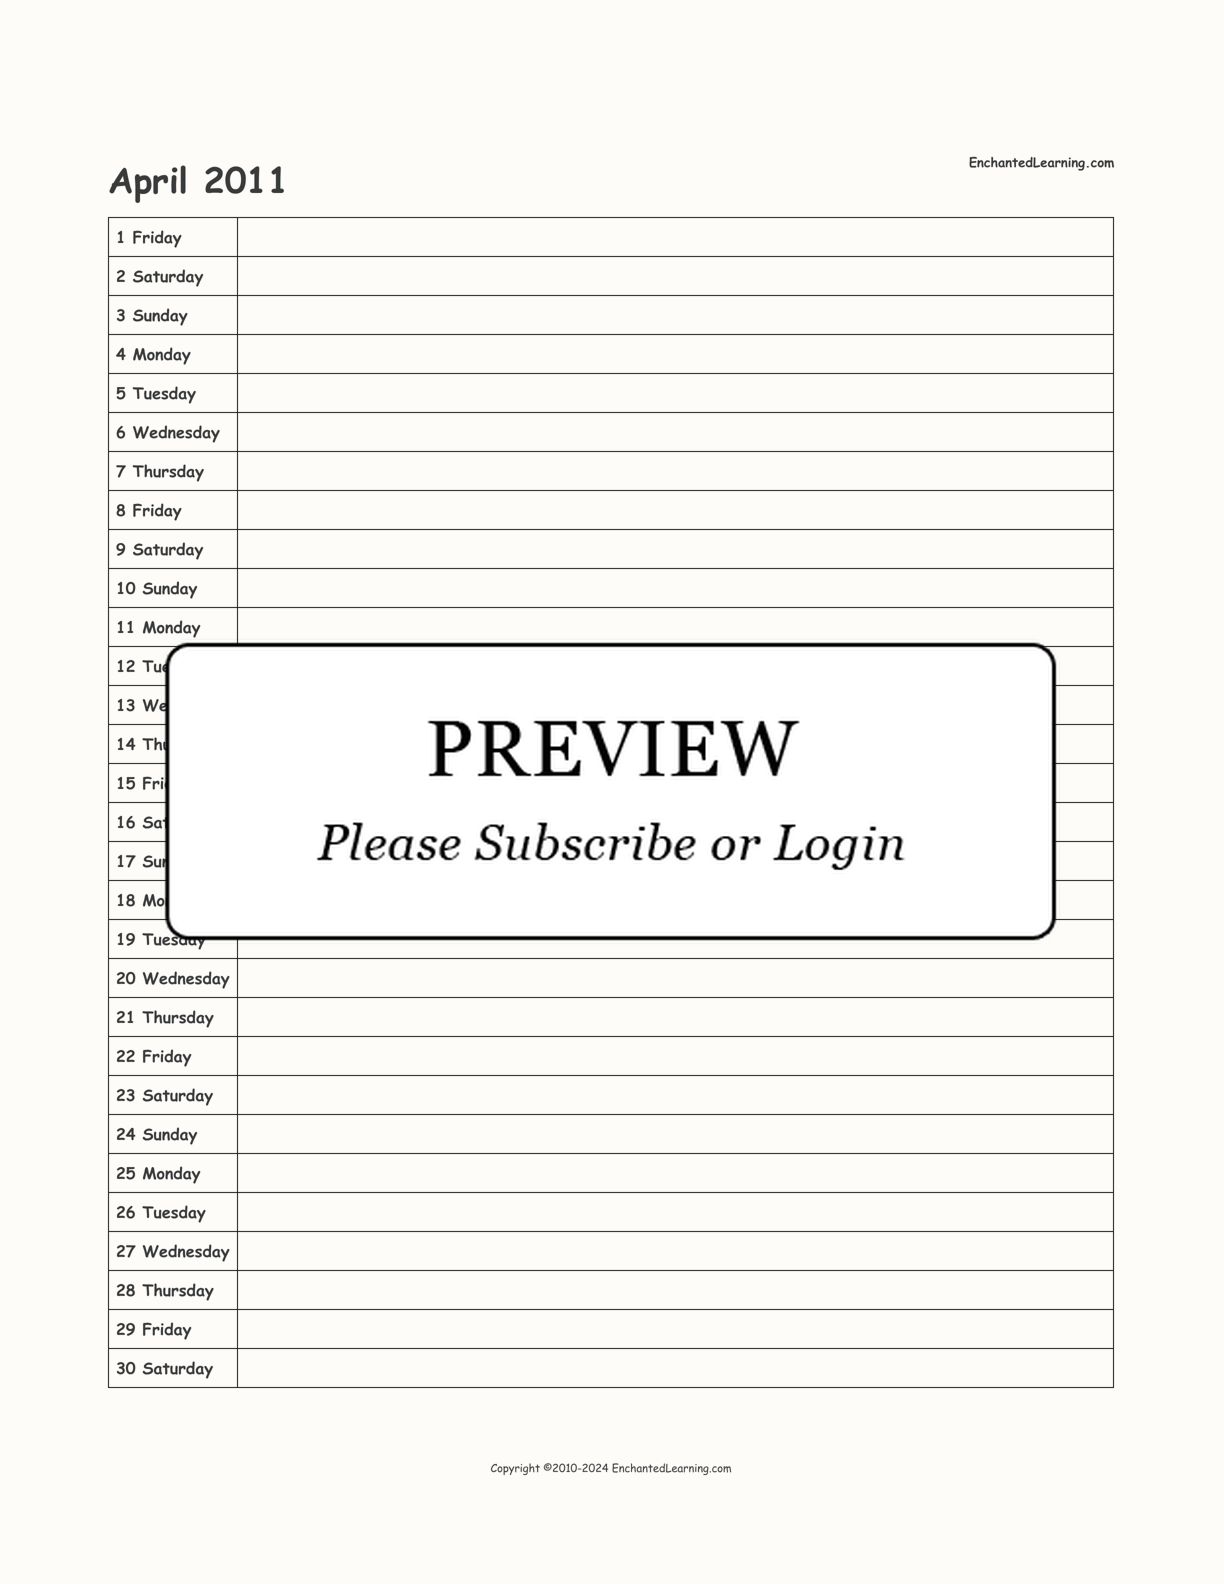 2011 Scheduling Calendar interactive printout page 4